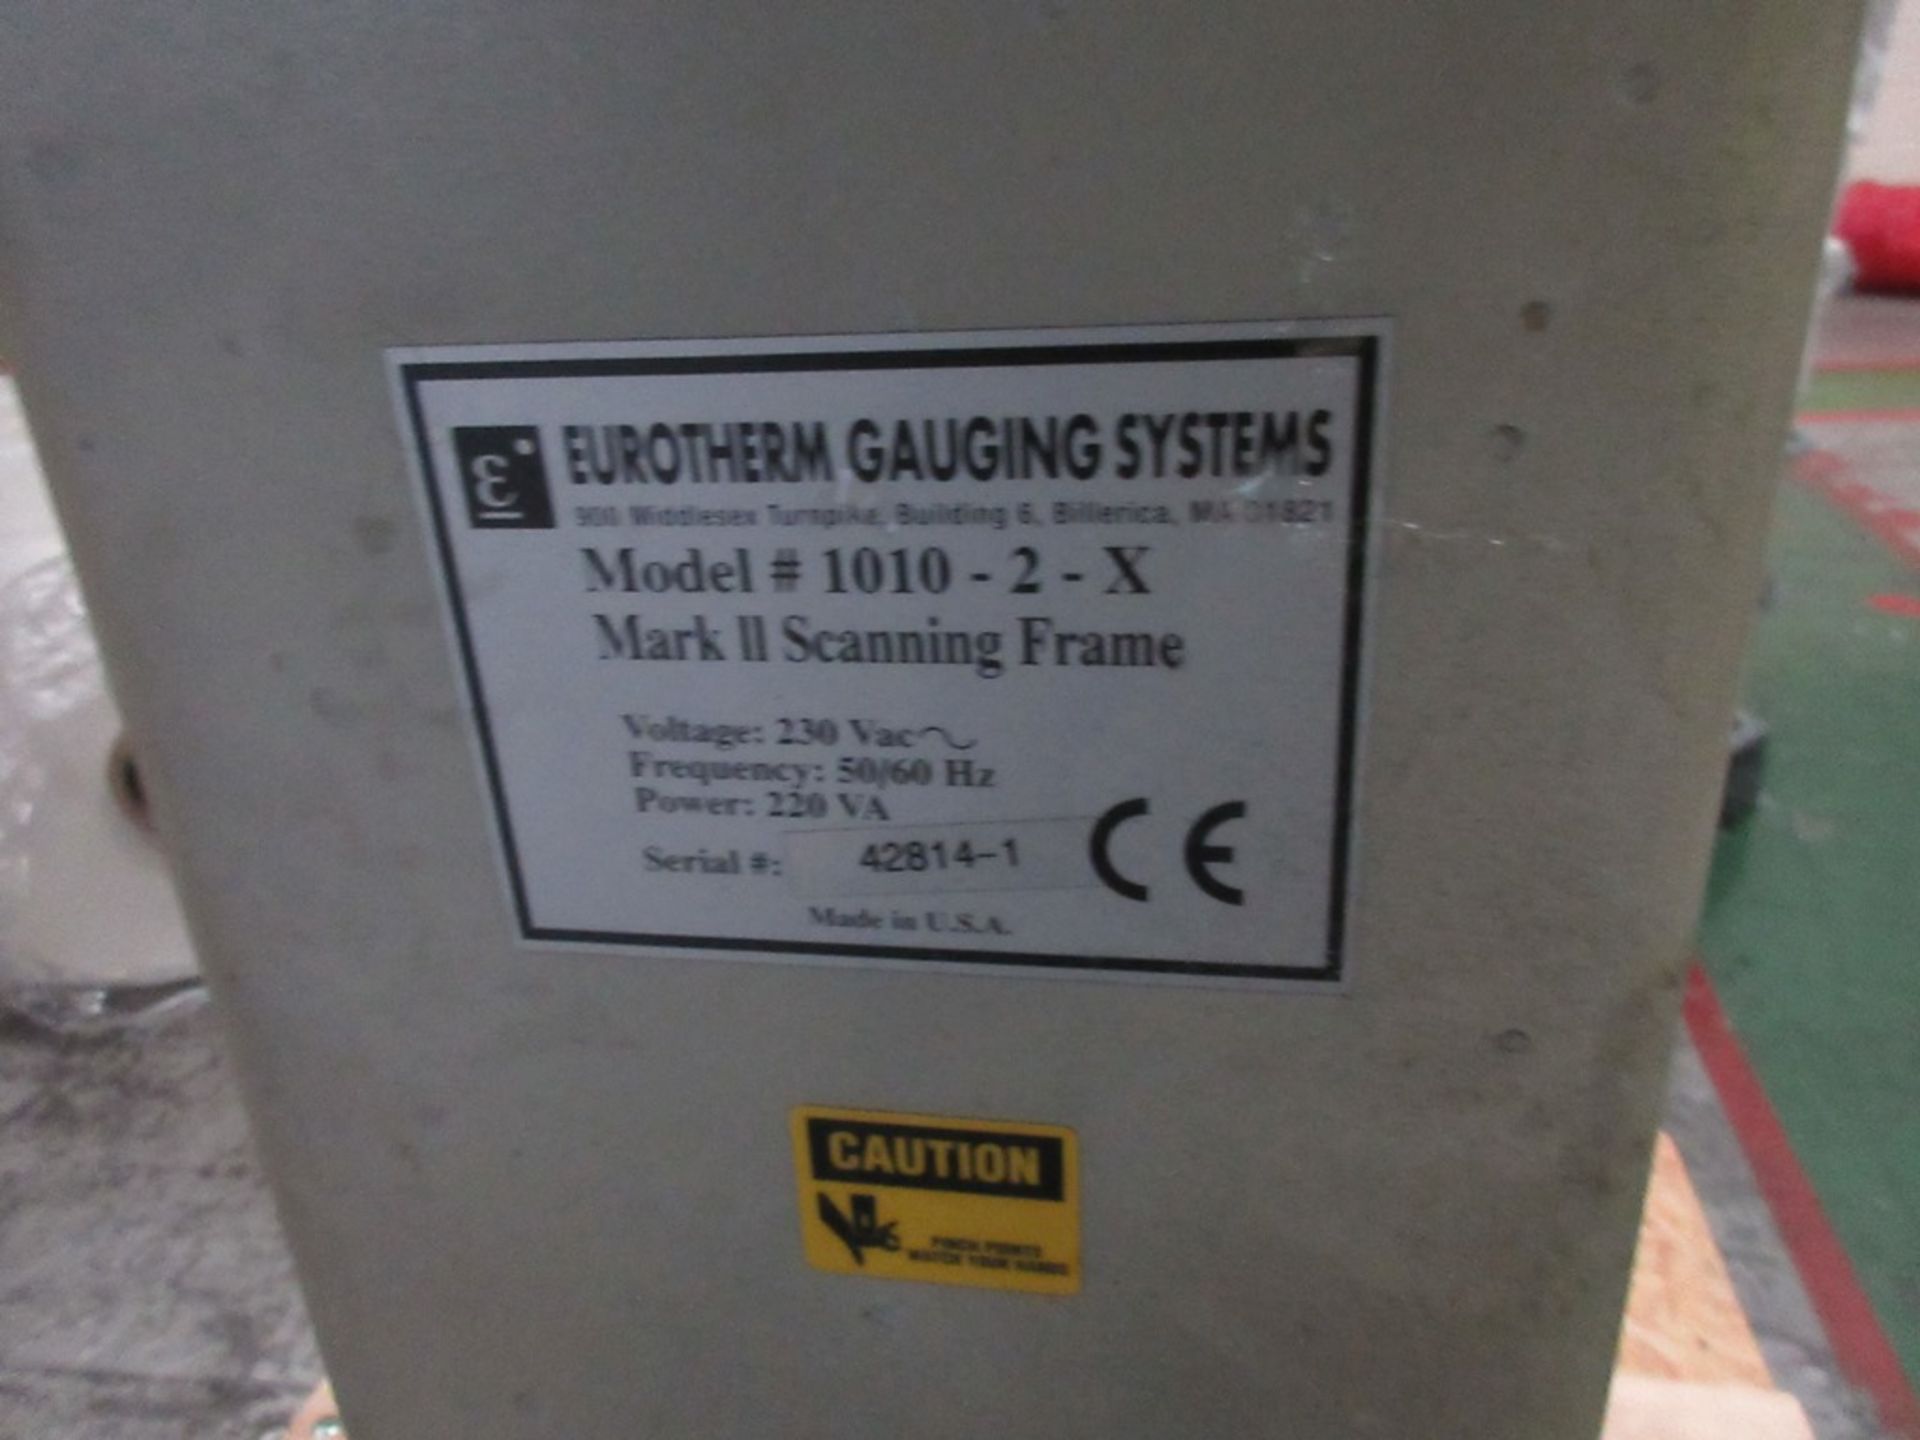 Eurotherm gauging system, model 1010-2-X with Mark II scanner frame, s/n: 42814-1 - for spares or - Image 4 of 6